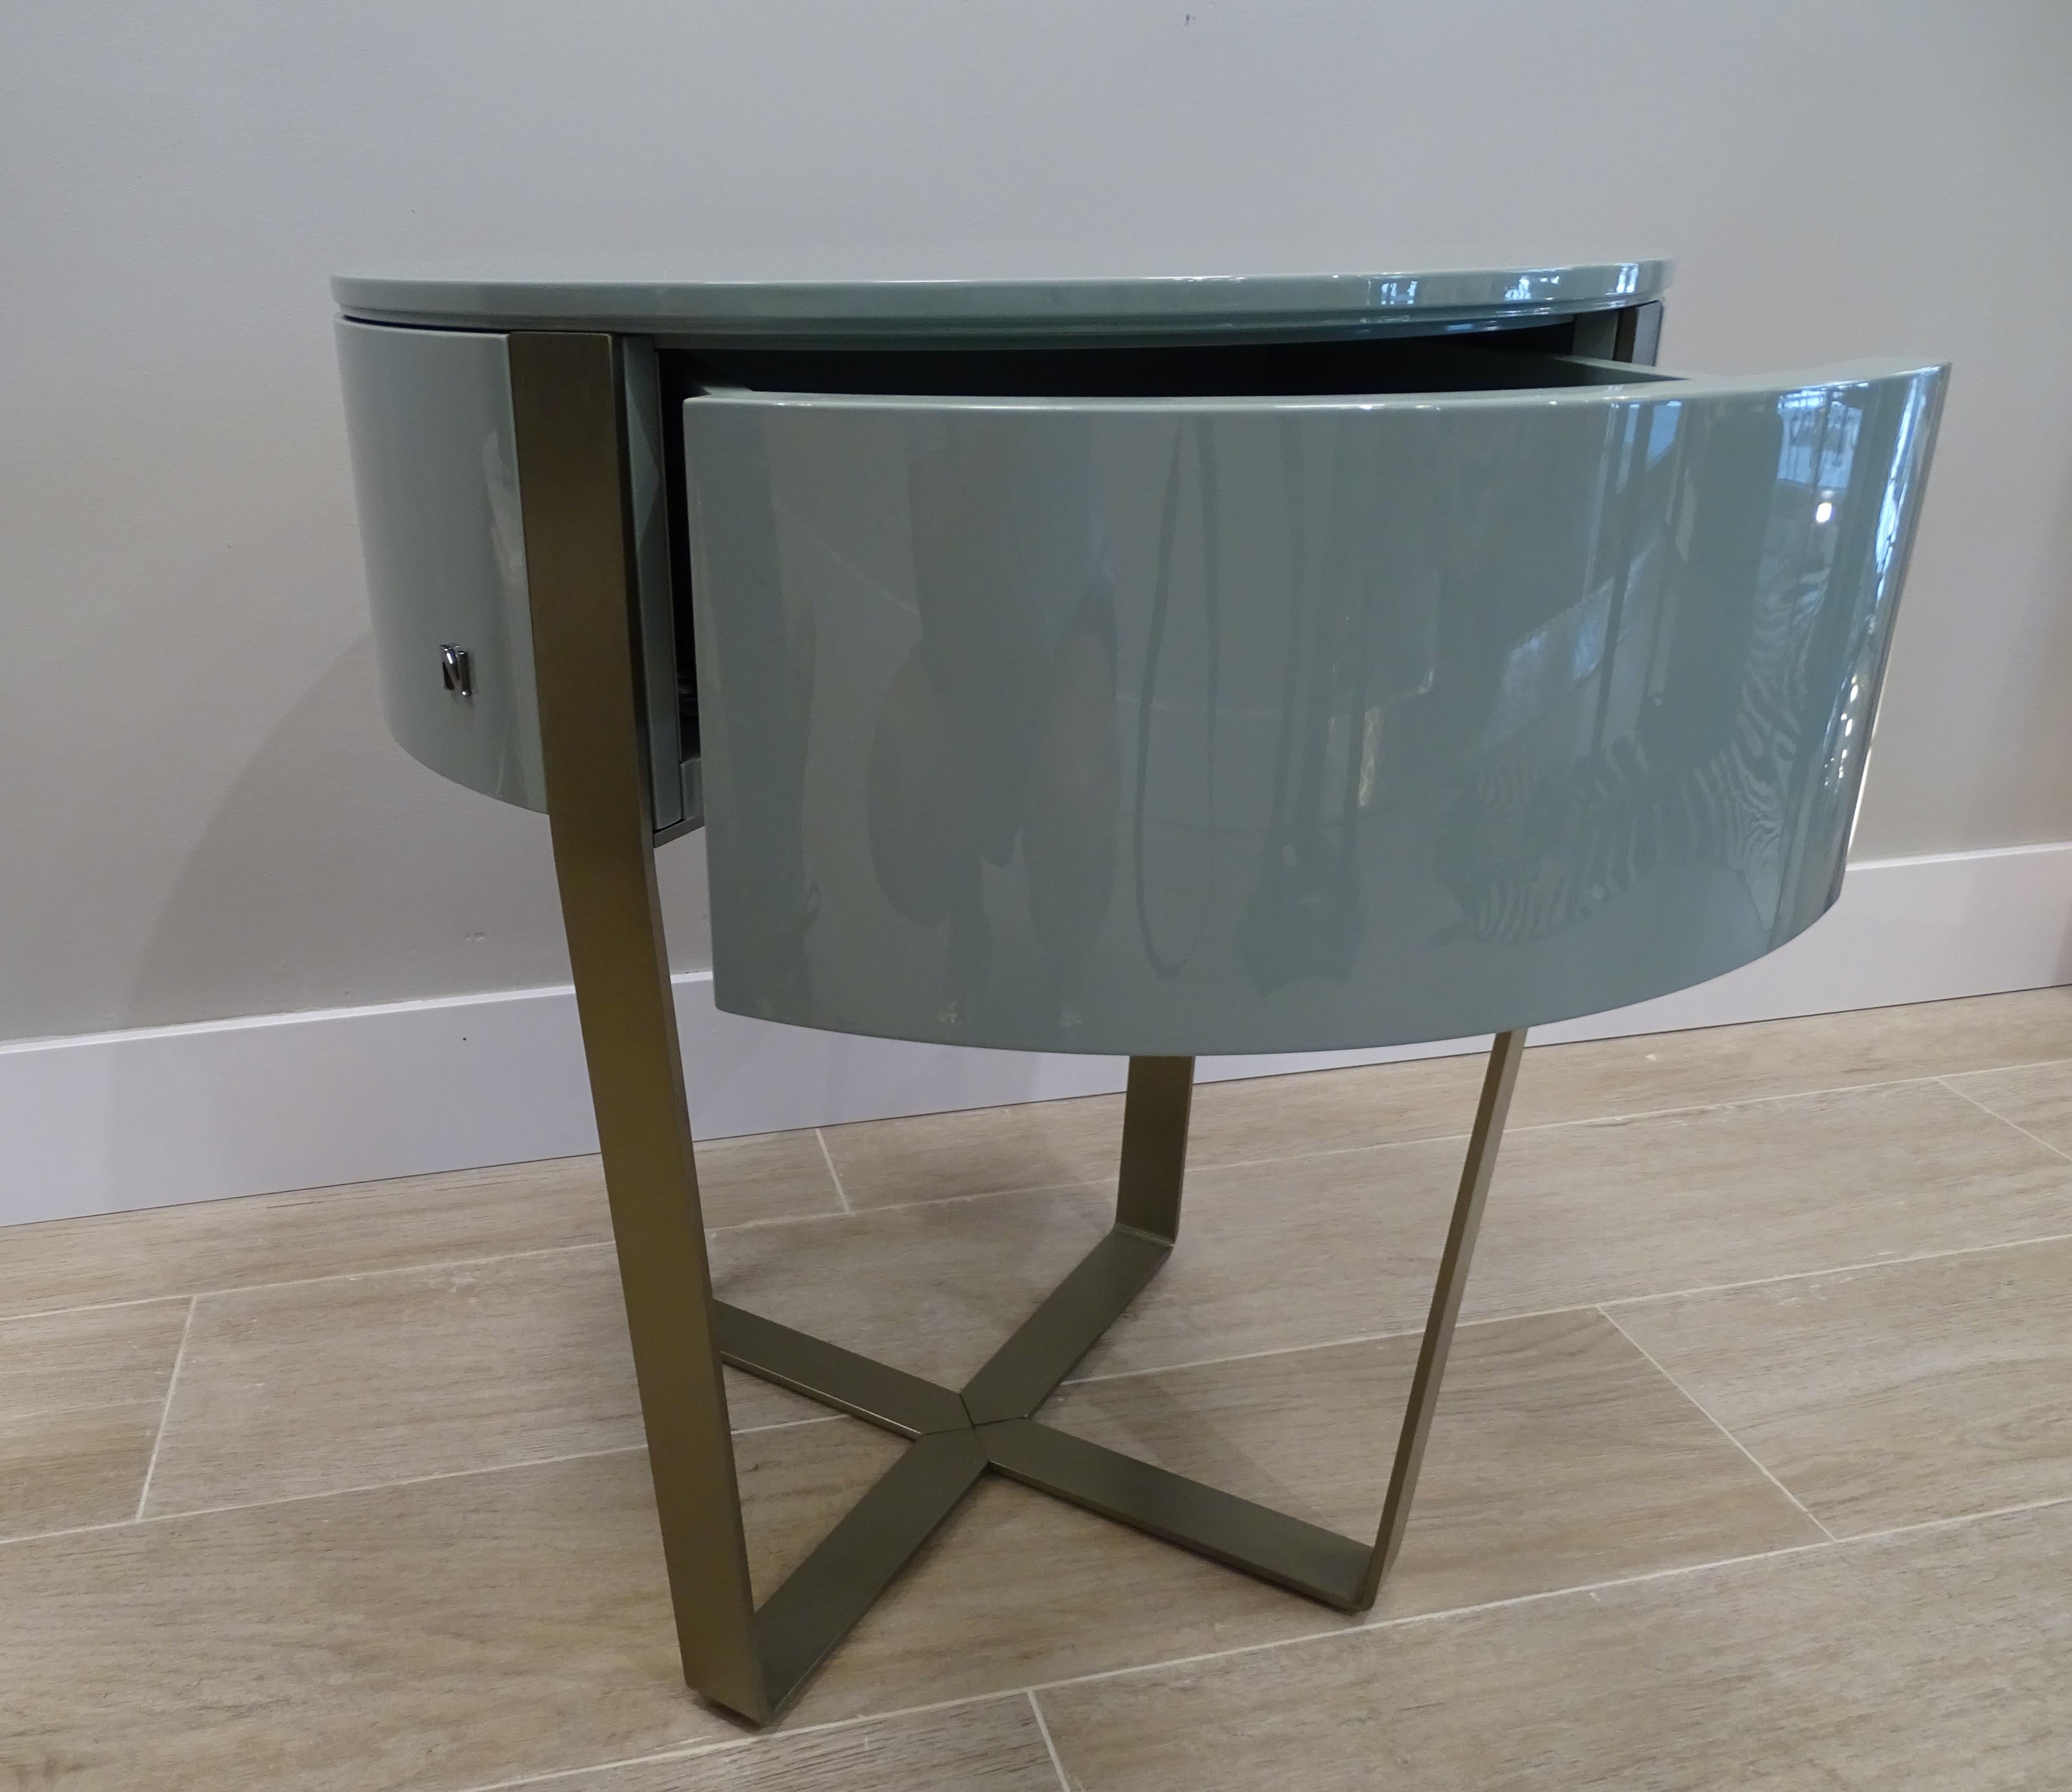 Contemporary Natuzzi Italian Green Sidetable in Glossy Celadon Colour, One Drawer